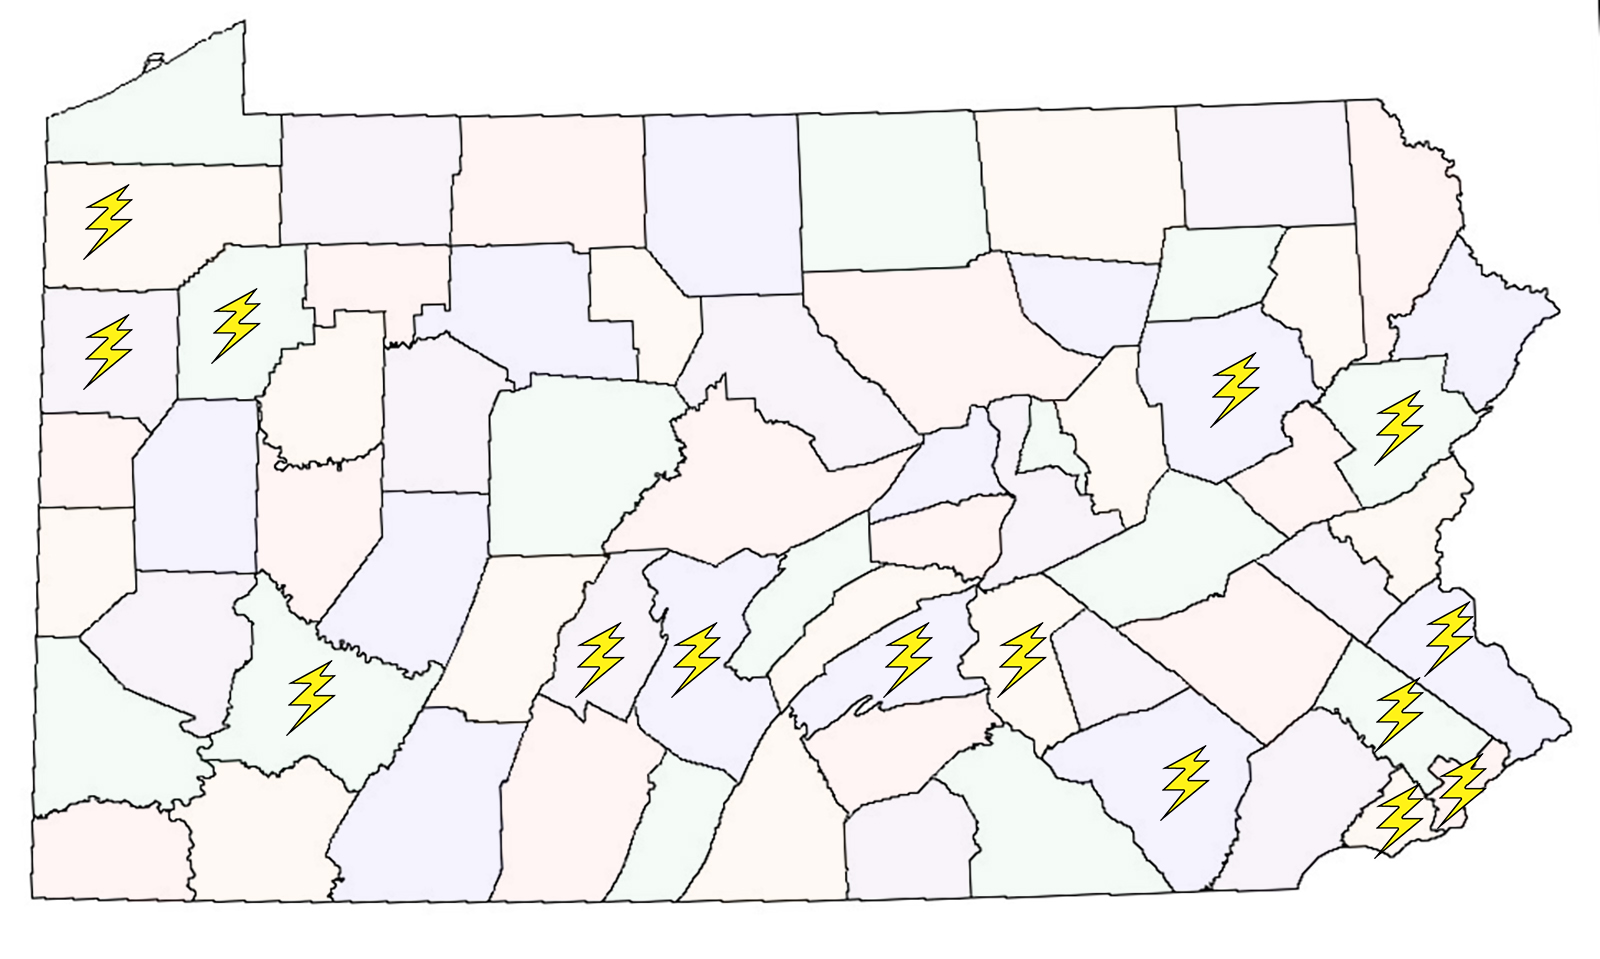 A colored map of Pennsylvania with yellow lightning bolts on the counties where SAU1 staff and board members are located.